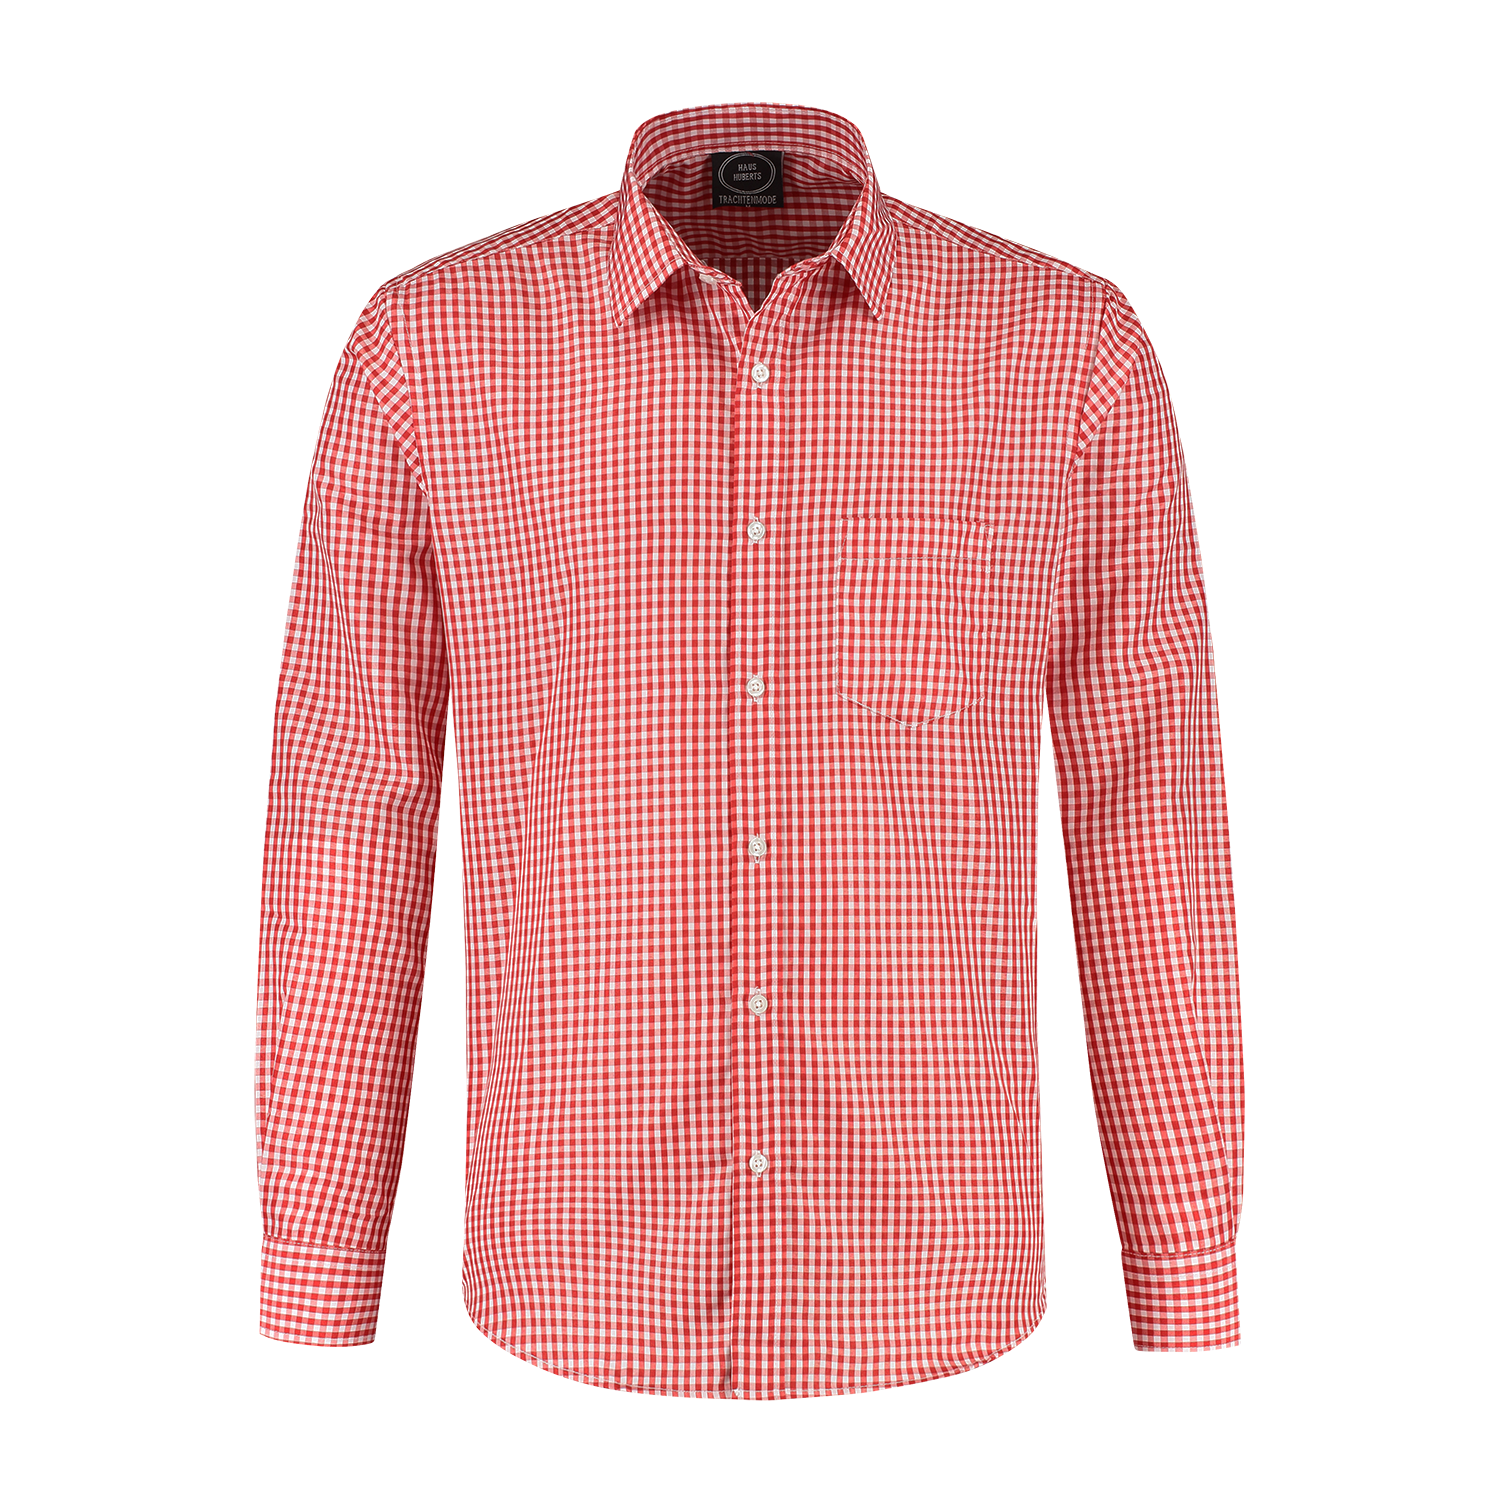 Overhemd rood-wit geruit 100% polyester